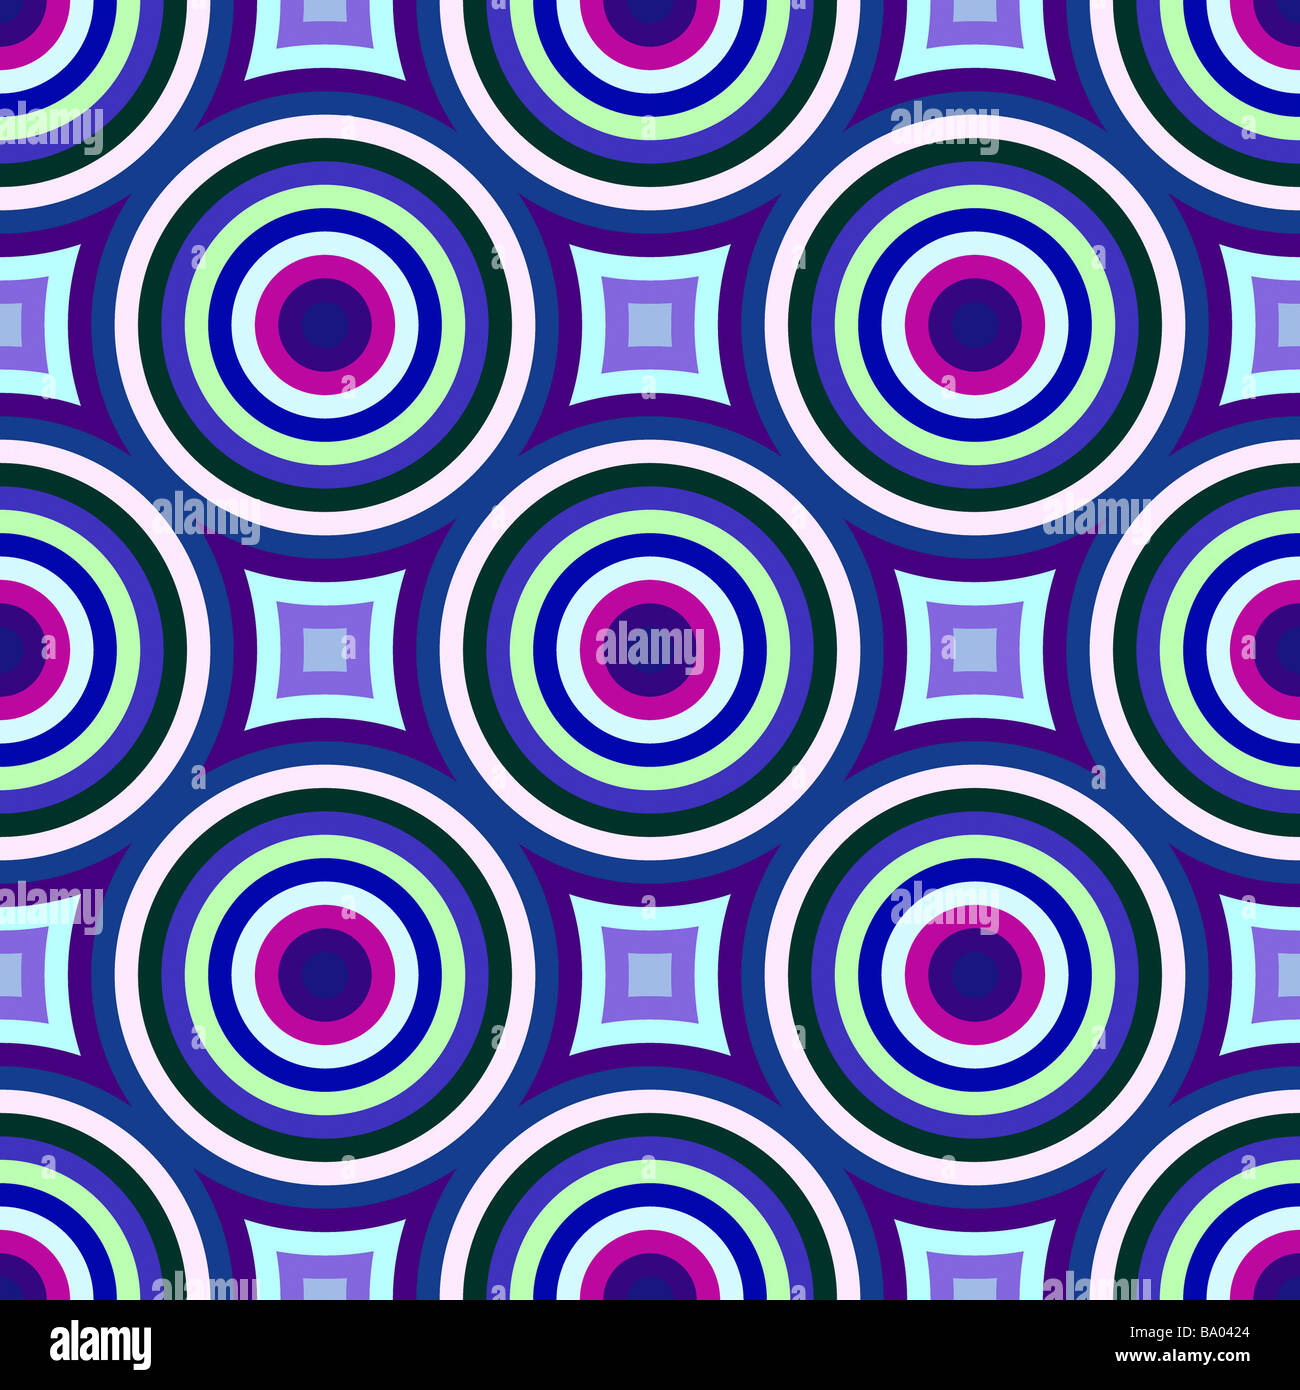 Colorful Abstract Retro Patterns Geometric Design Wallpaper Stock